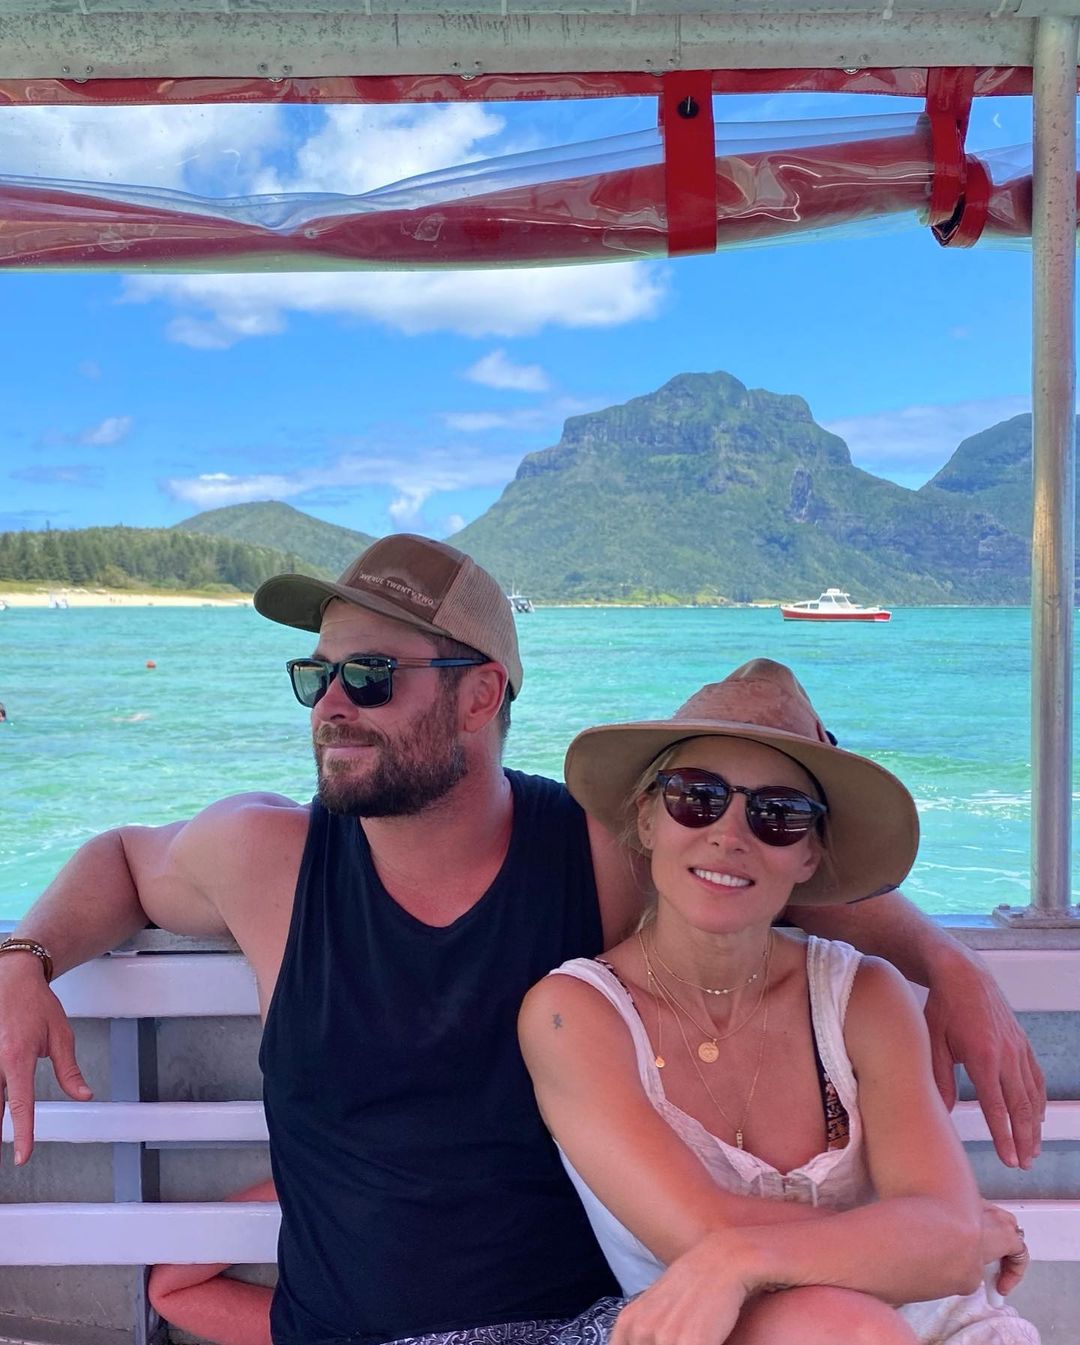 Chris Hemsworth Shows Off in Shirtless Snaps During Island Family Getaway Ahead of Thor Filming